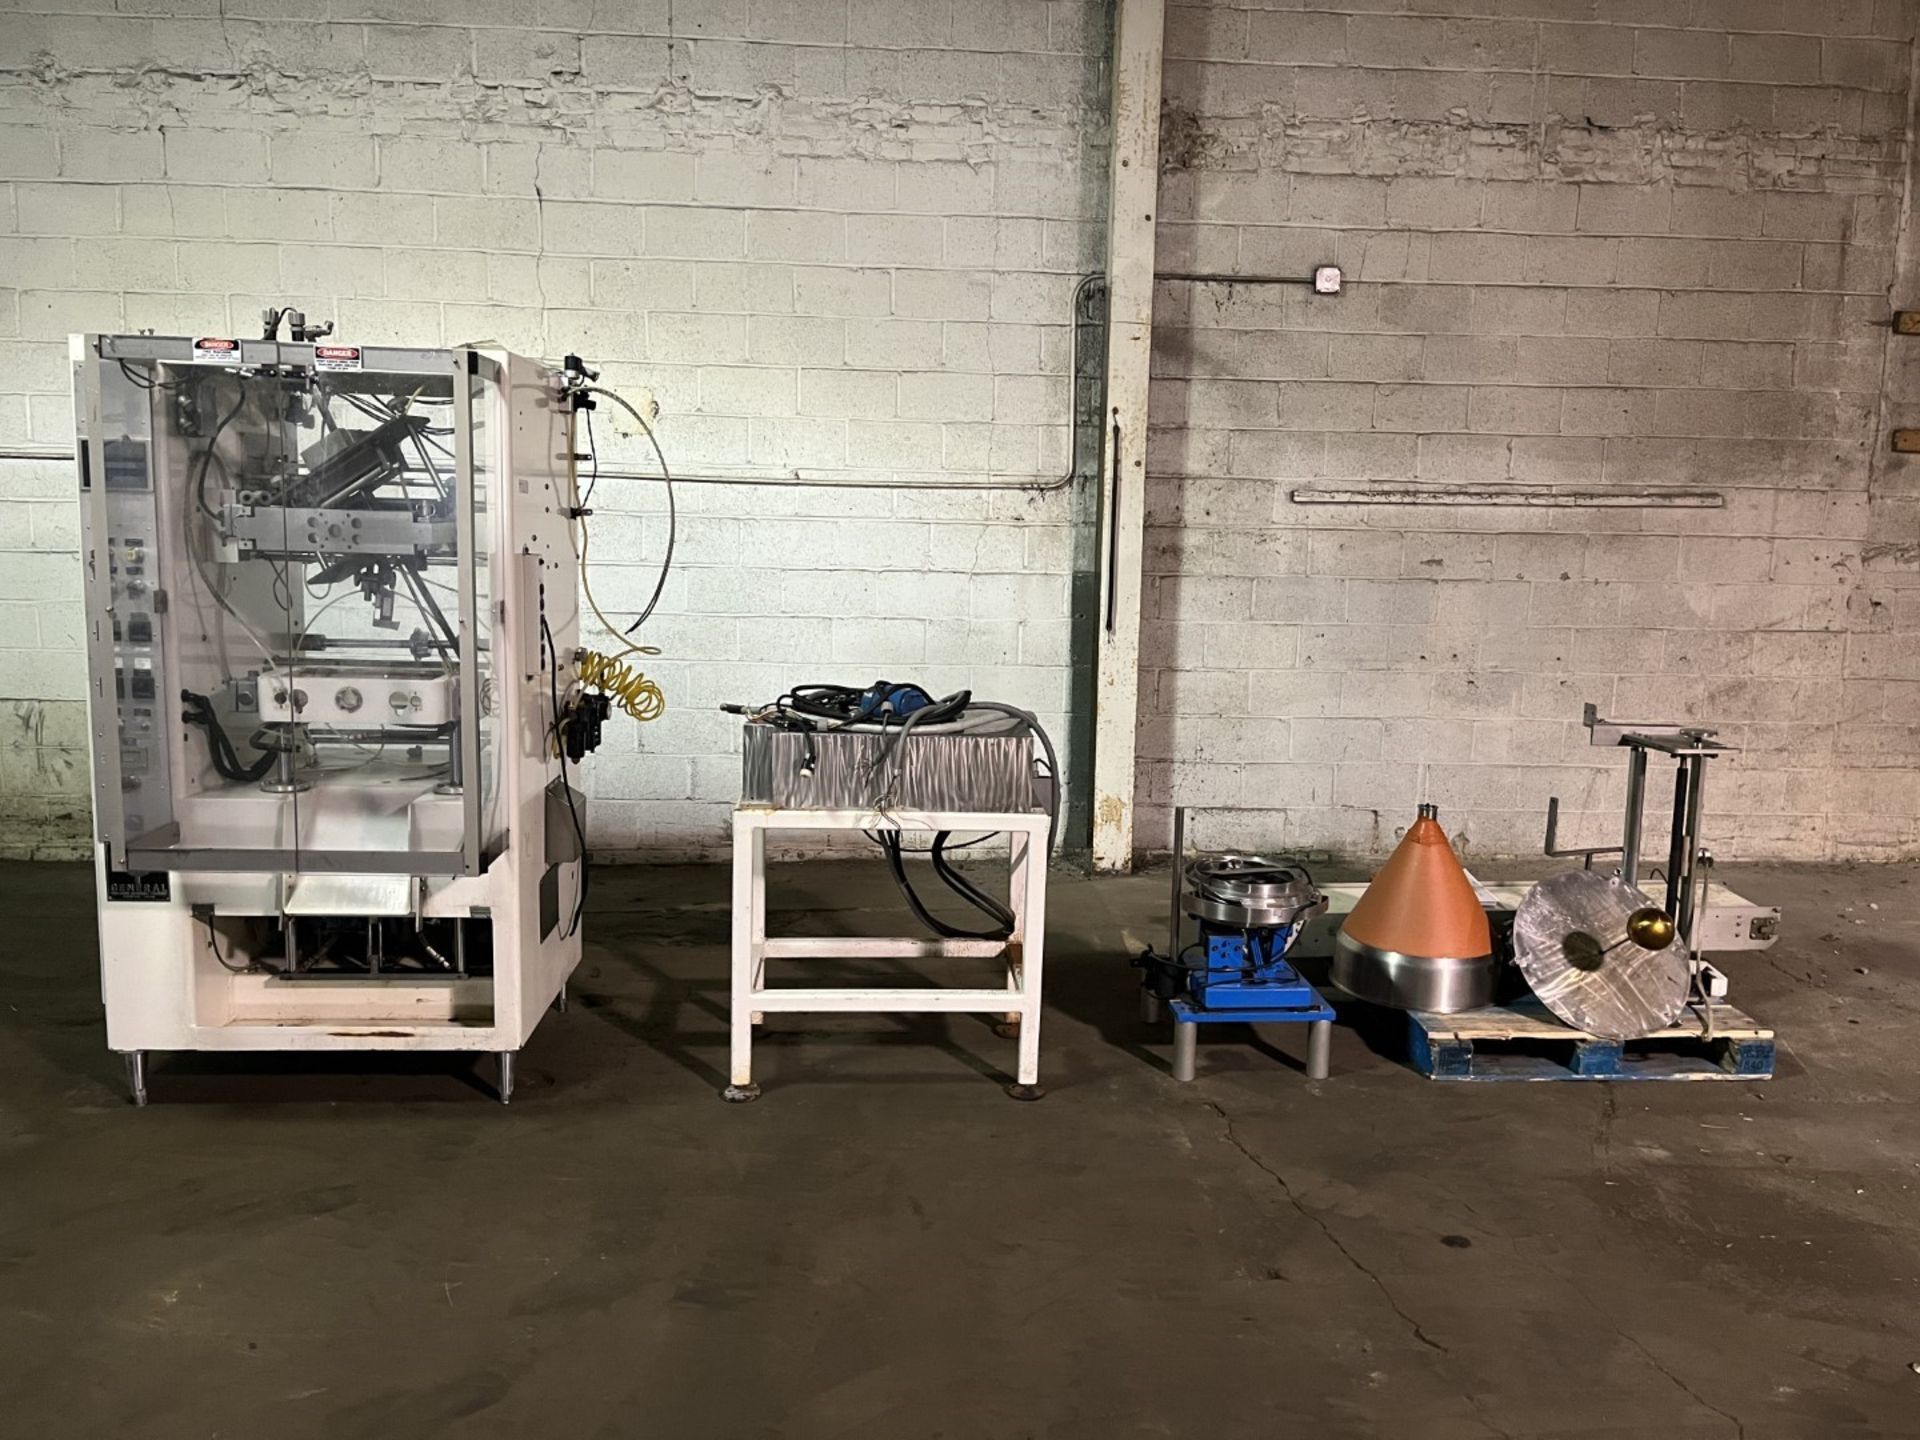 General Packaging Vertical Fill Form and Seal Machine. **See Auctioneers Note**